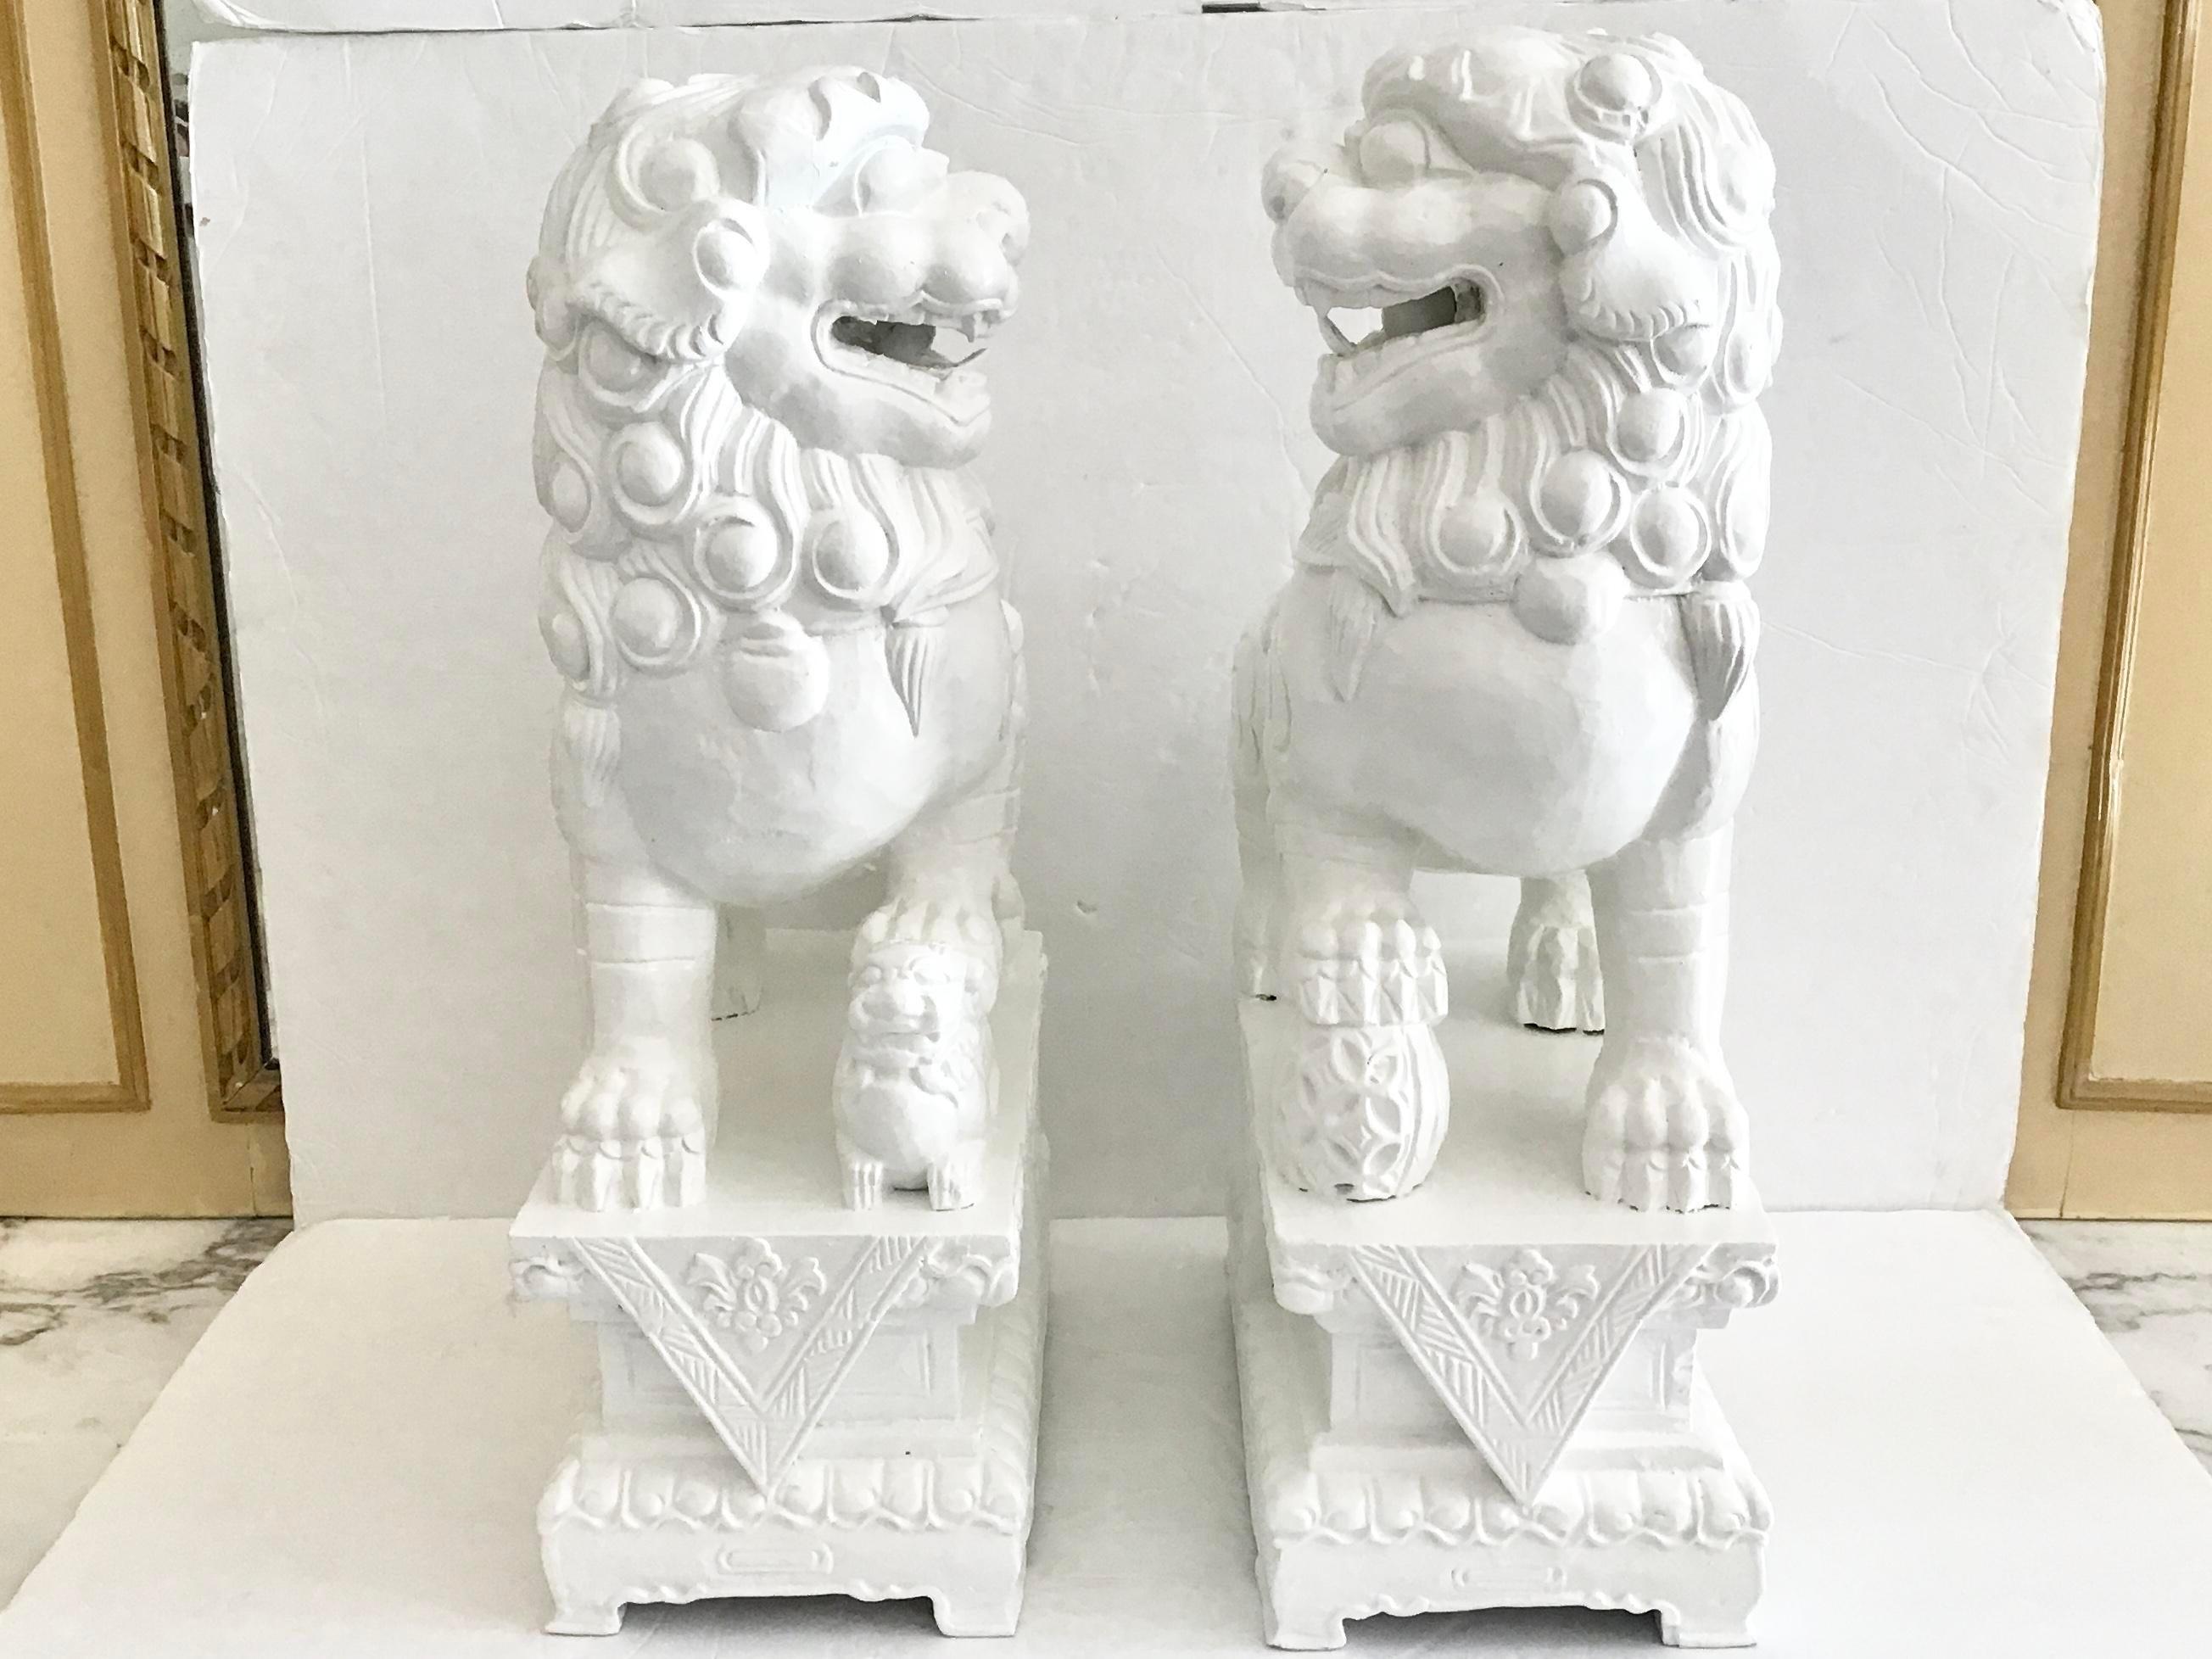 Pair of freshly lacquered in white fantastic large foo dogs made of wood. The floral carving details at the base is amazing. Add it to your collection of Asian art.